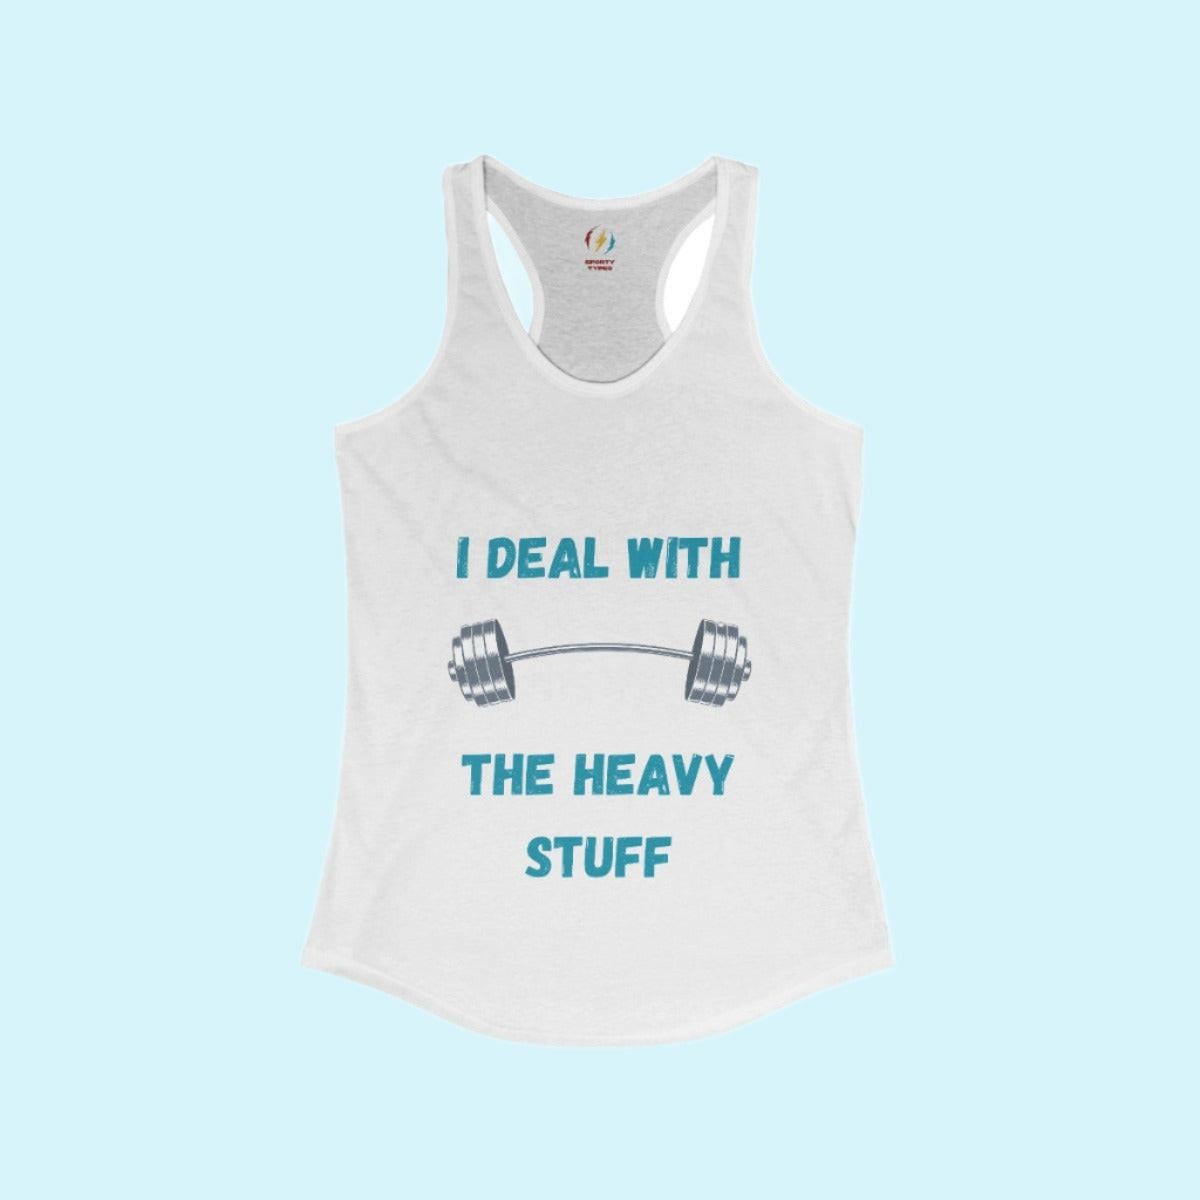 White Women's I Deal With The Heavy Stuff Performance Racerback Tank Top